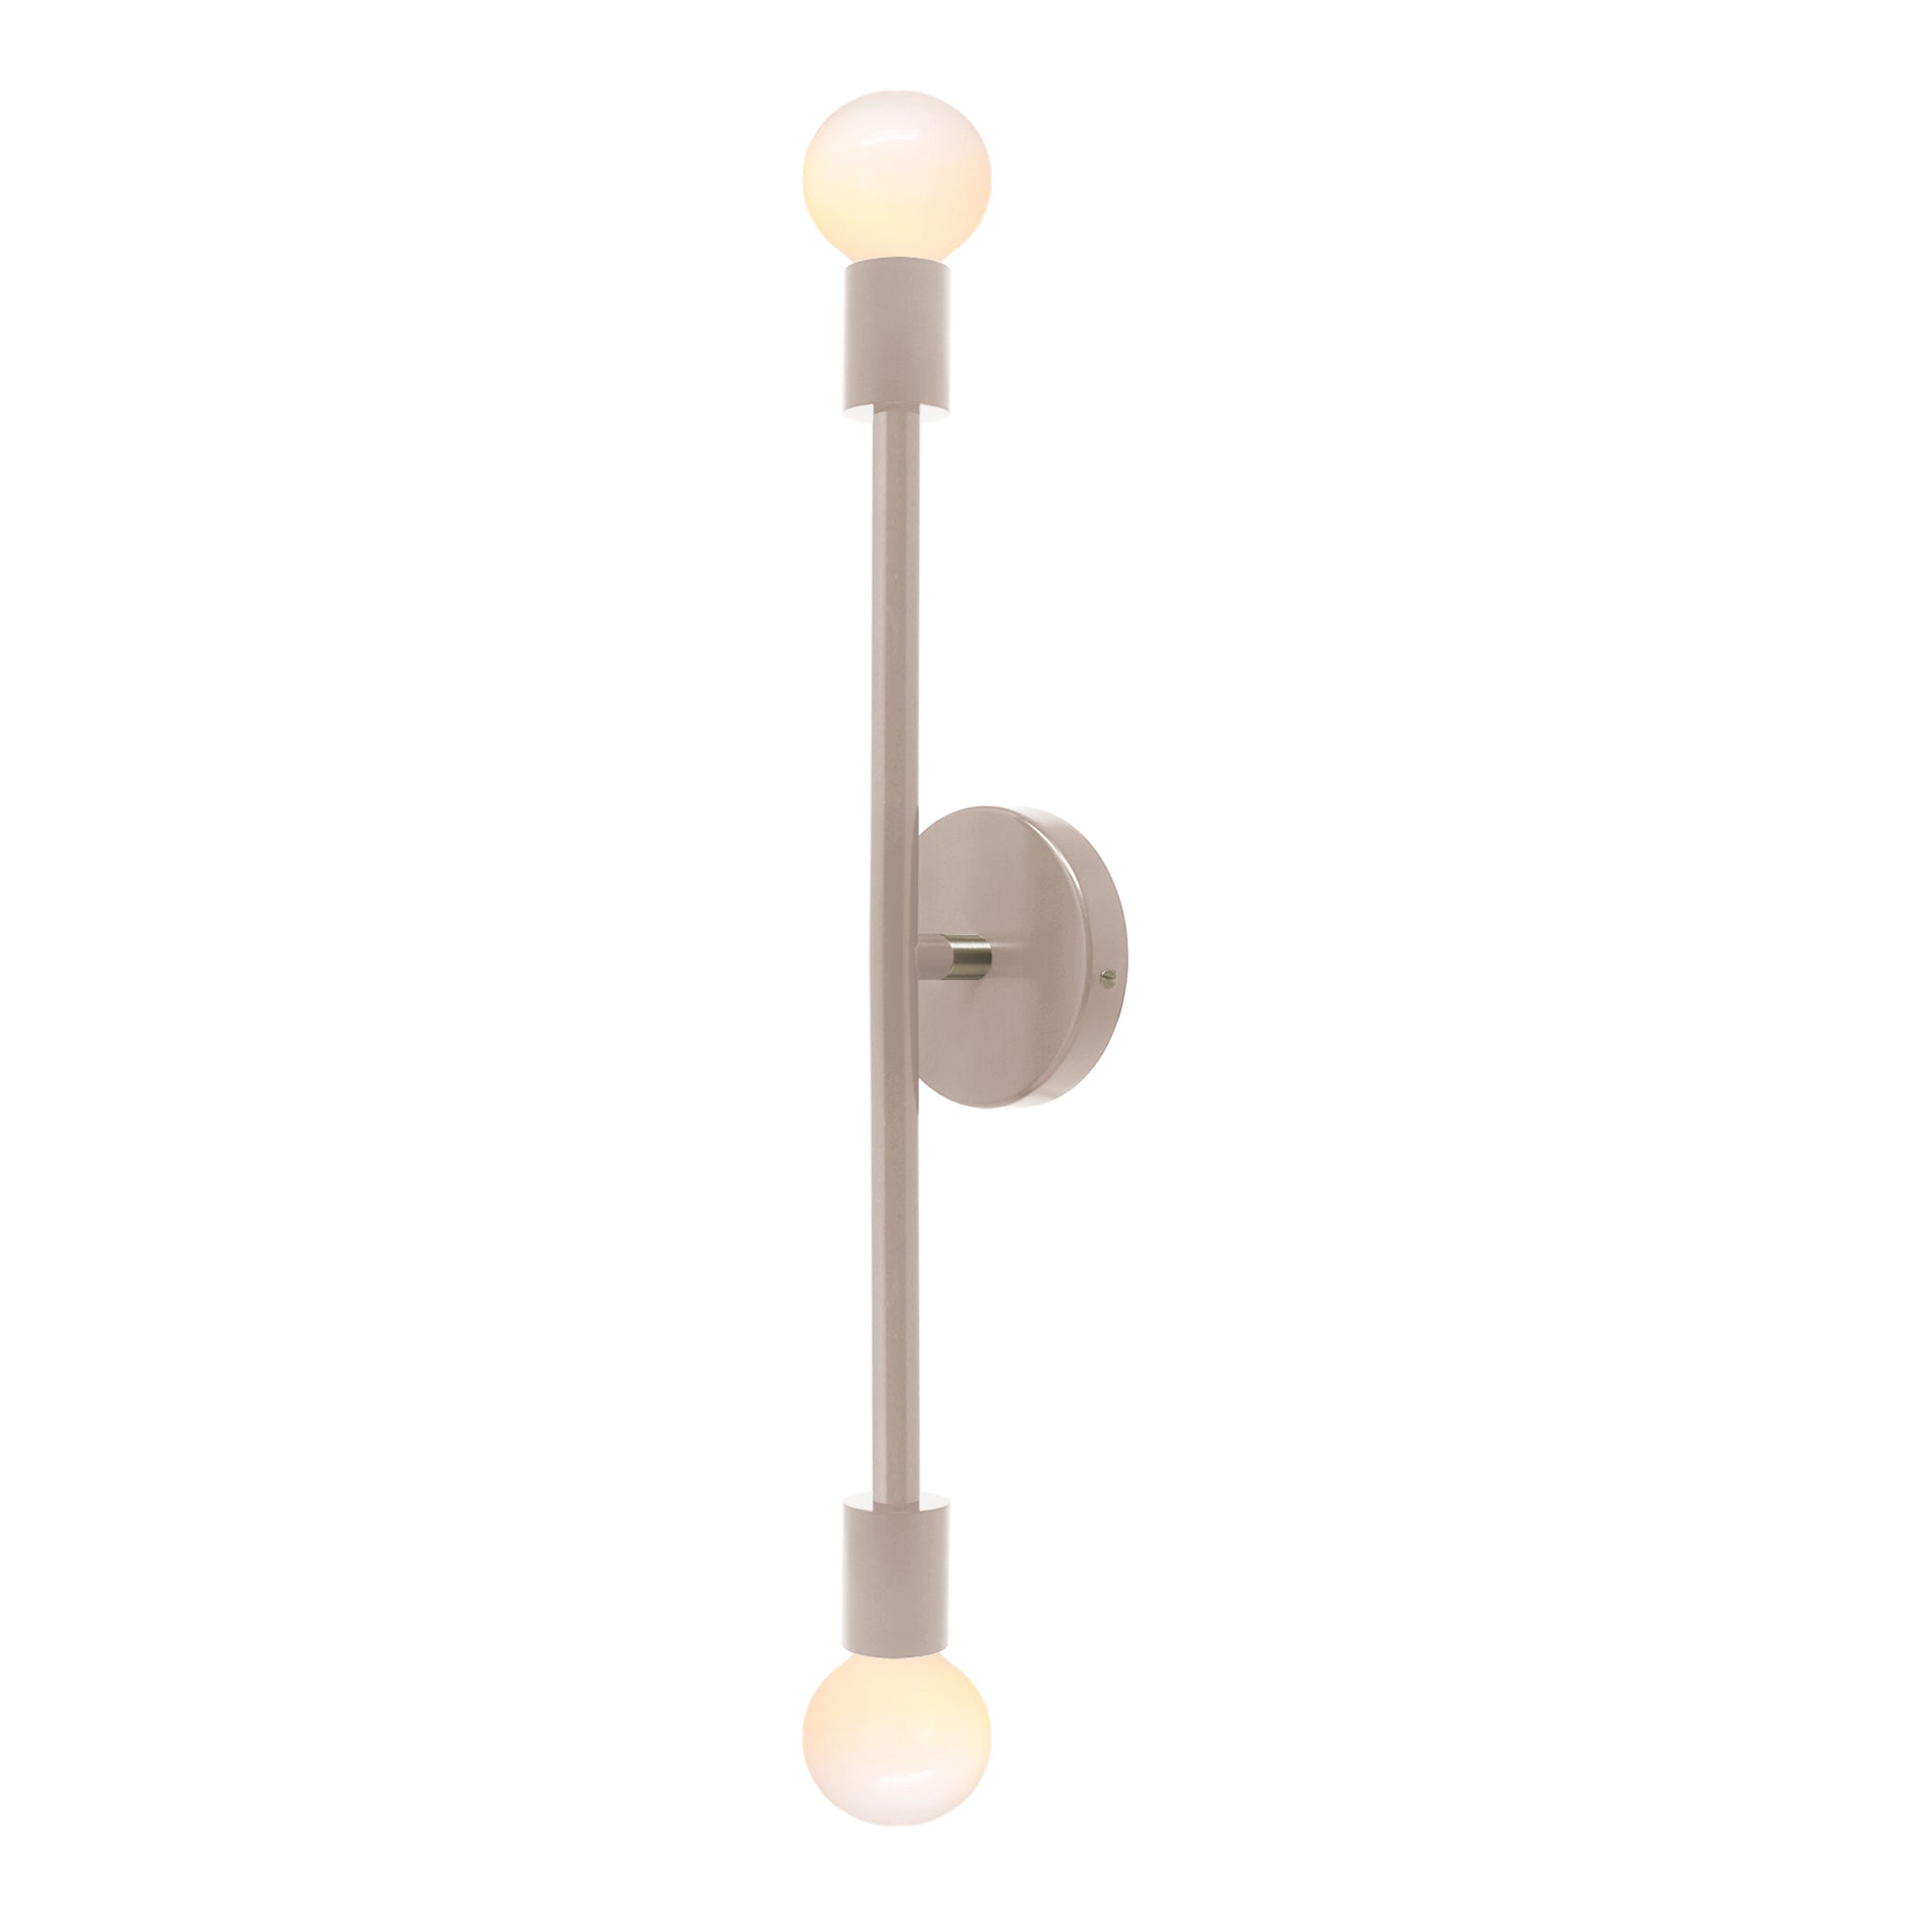 Nickel and chalk color Pilot sconce 23" Dutton Brown lighting